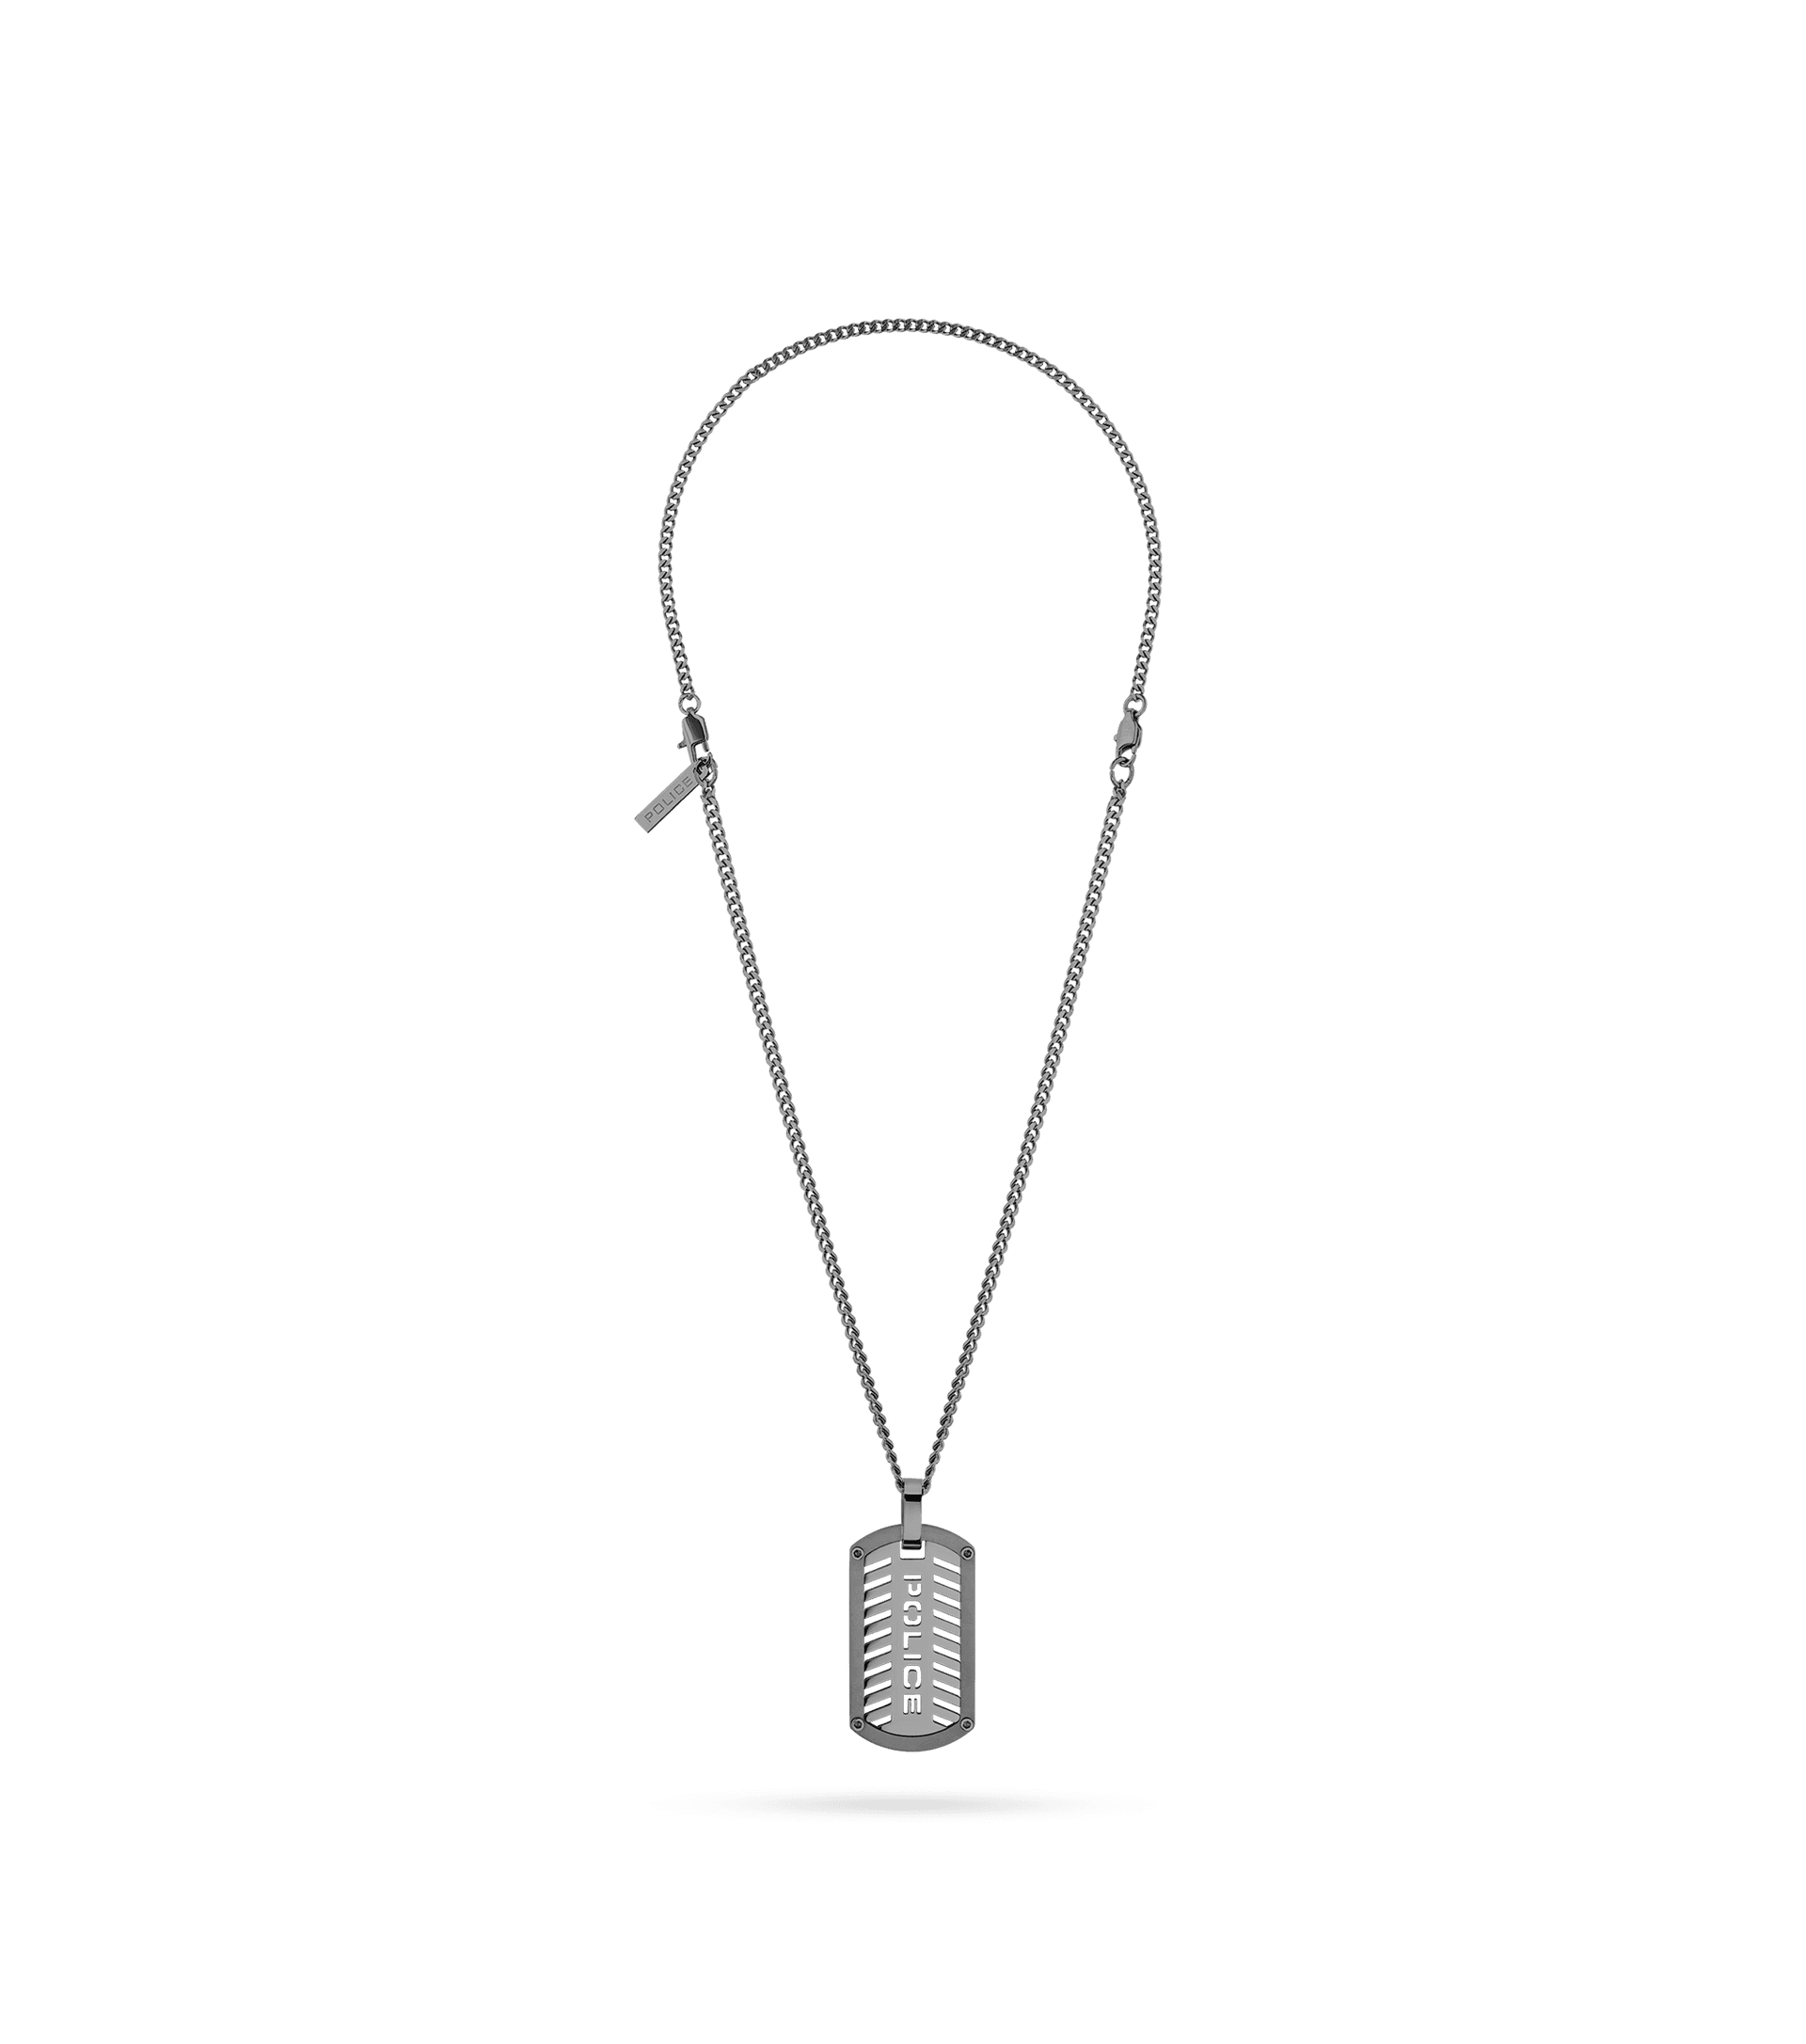 Police jewels - Hinged Necklace Police For Men PEAGN2211611